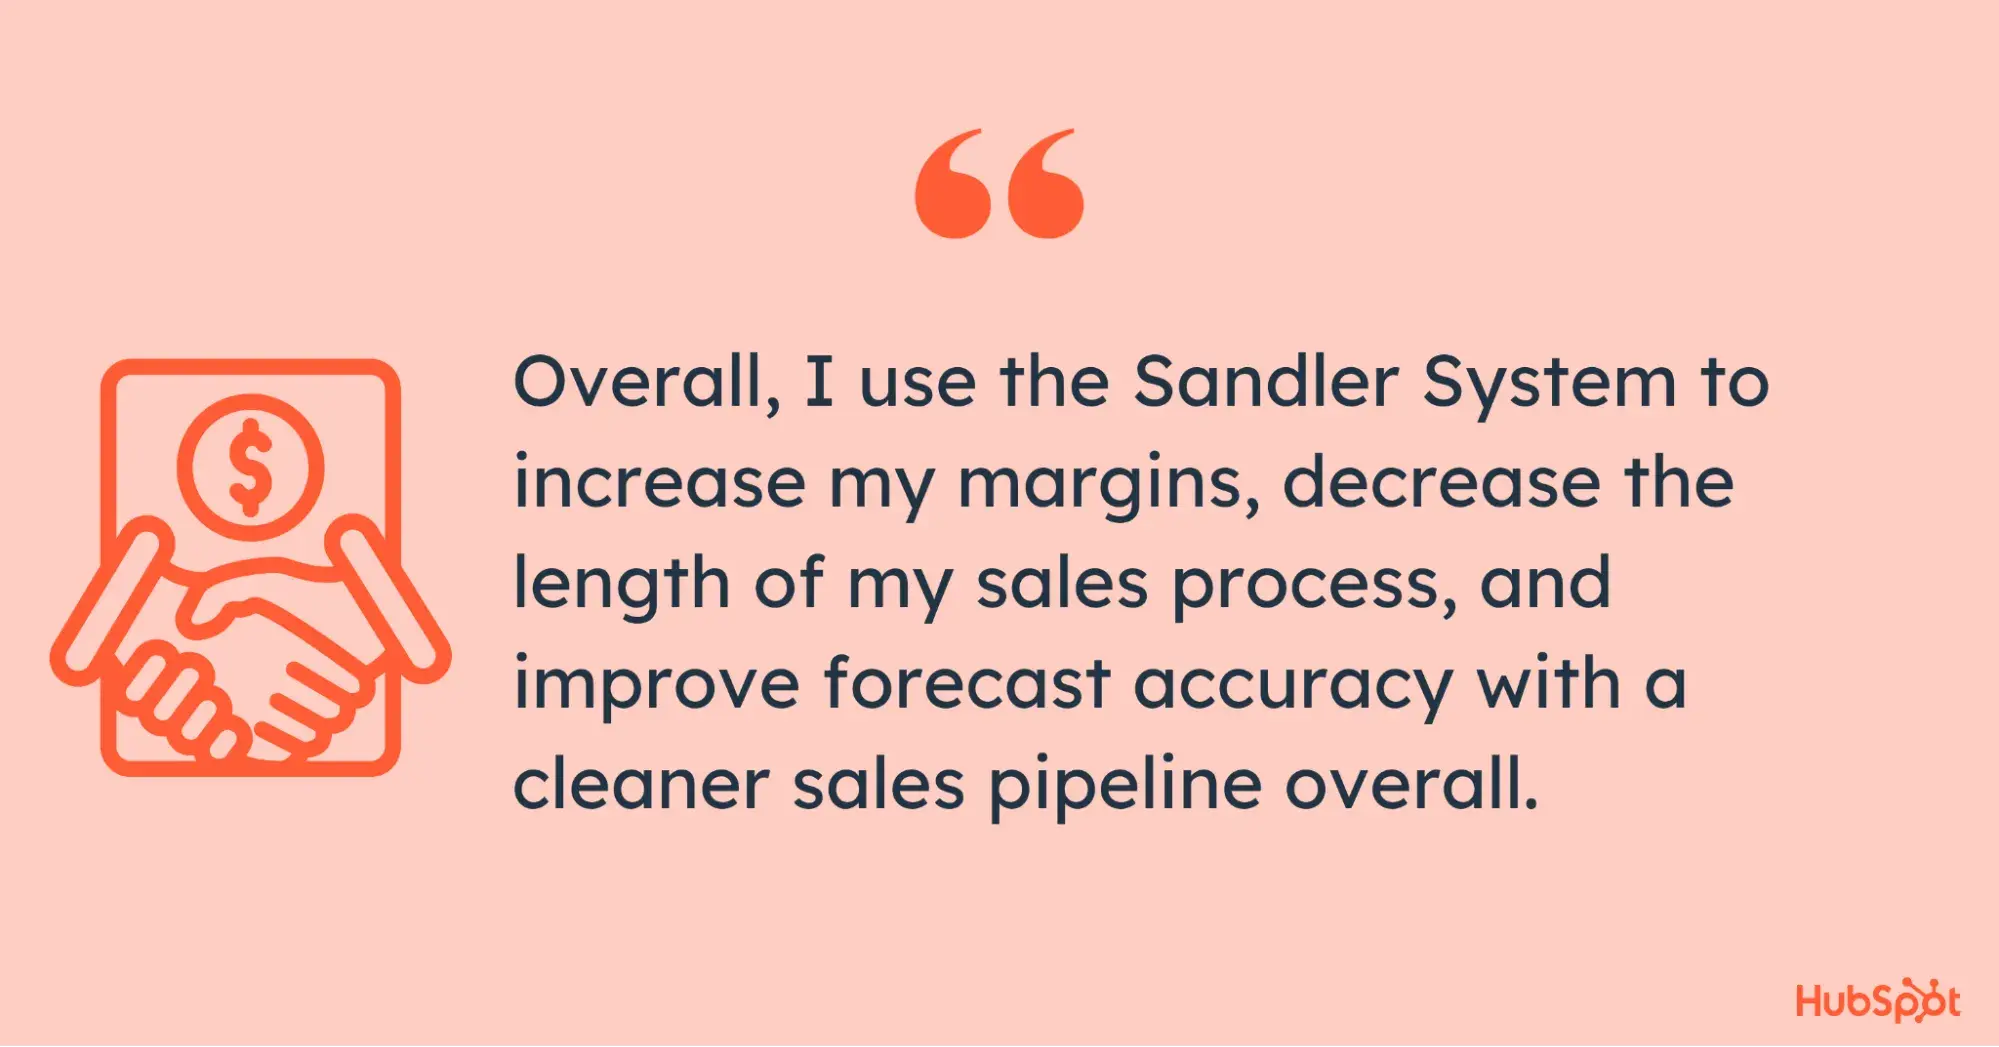 Quote about sandler selling system and why it’s successful